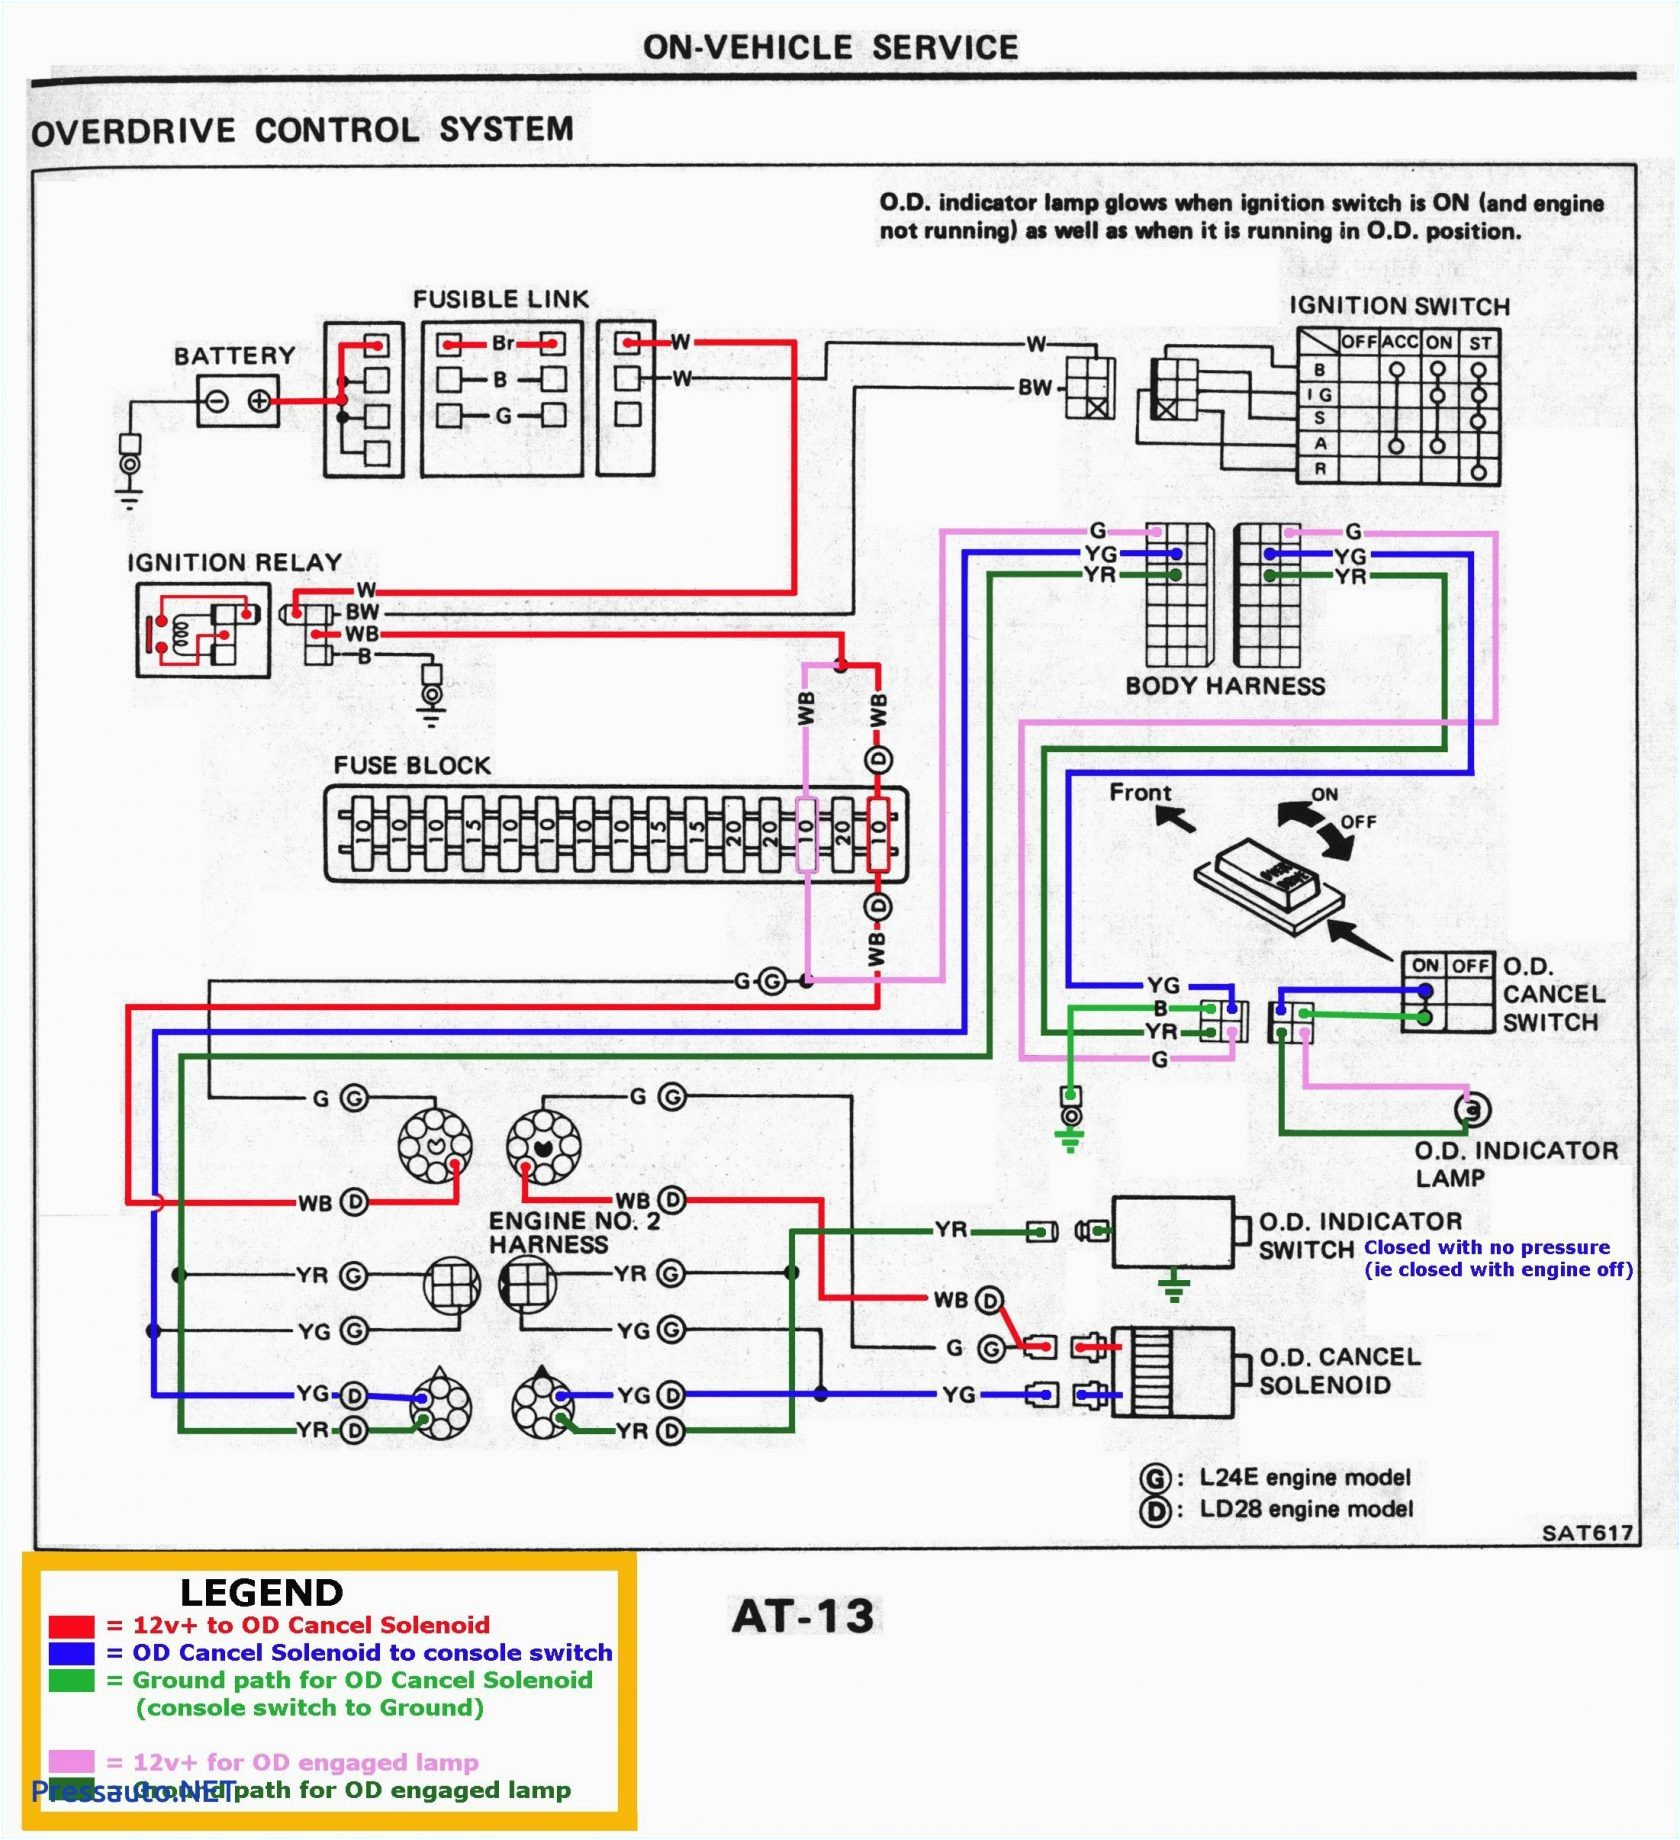 ls1 battery wiring diagram wiring diagram schemals1 engine wiring harness diagram click the image to wiring